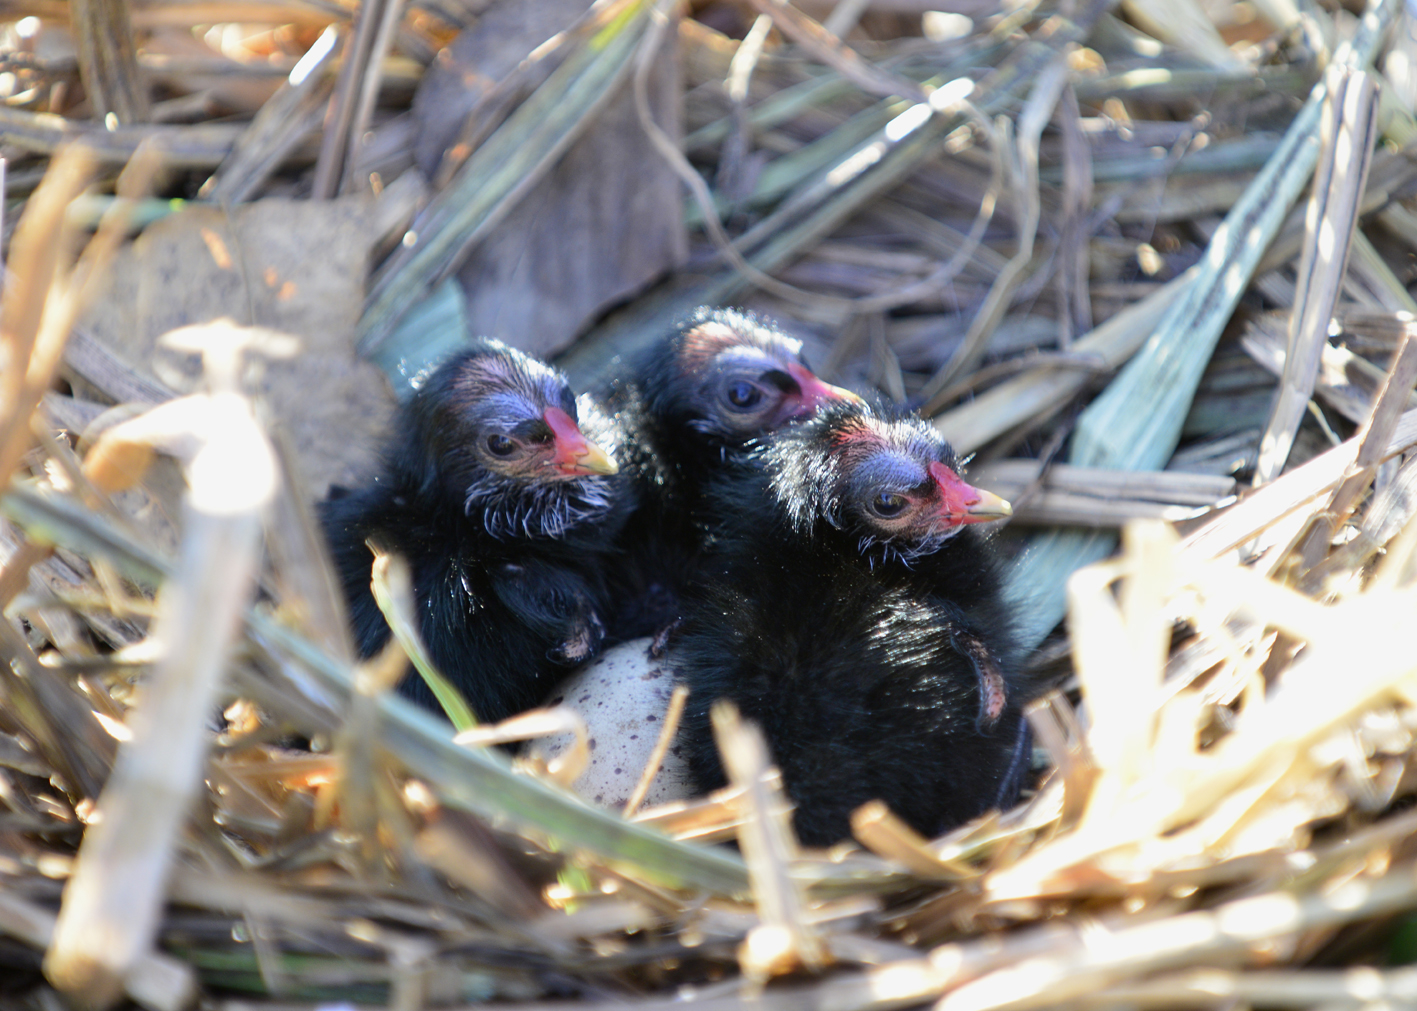 Moorhen chicks a sign of spring